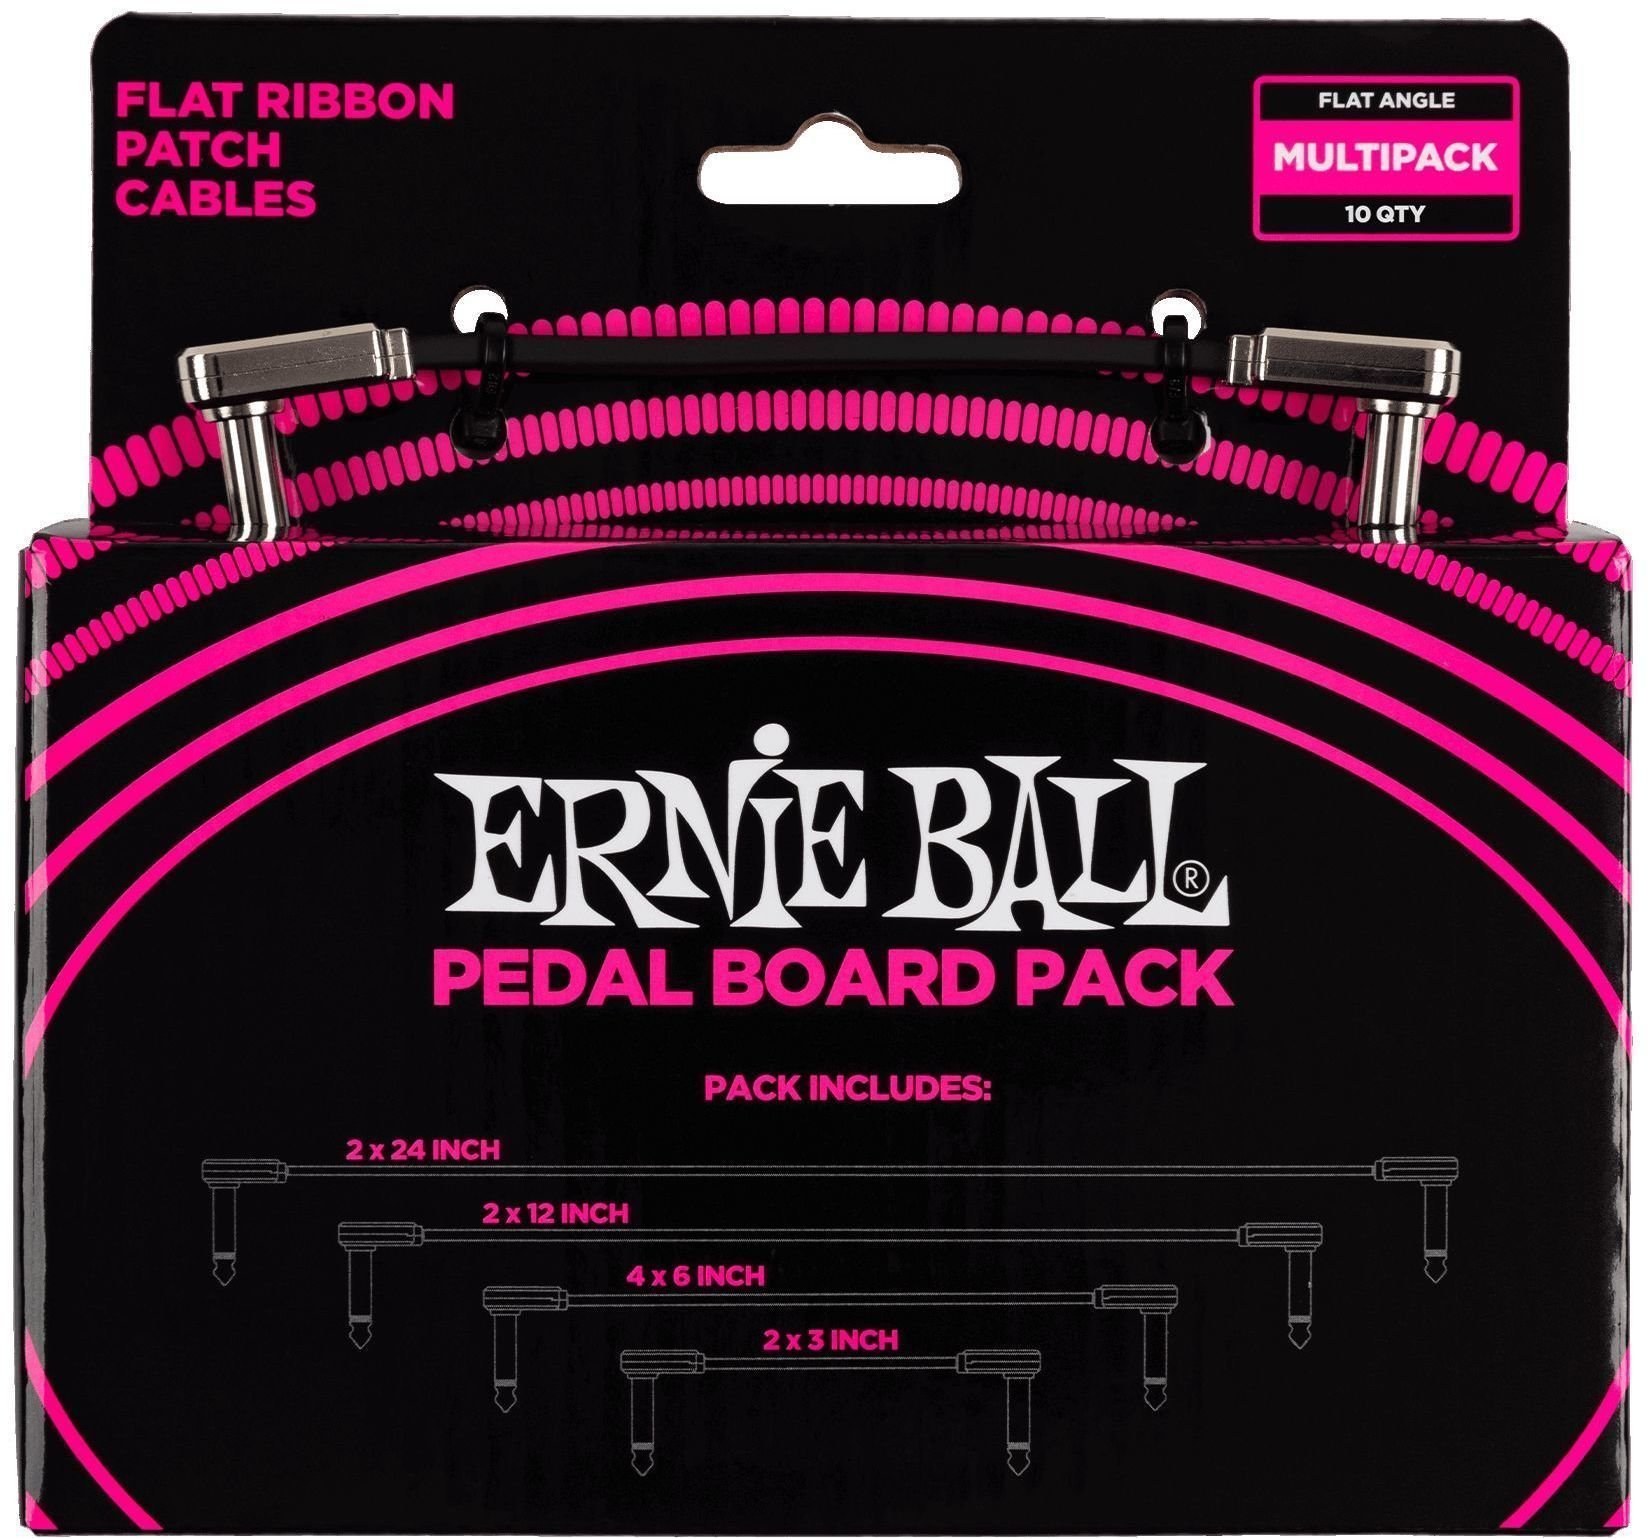 Adapter/Patch Cable Ernie Ball P06224 Black 15 cm-30 cm-60 cm-7,5 cm Angled - Angled